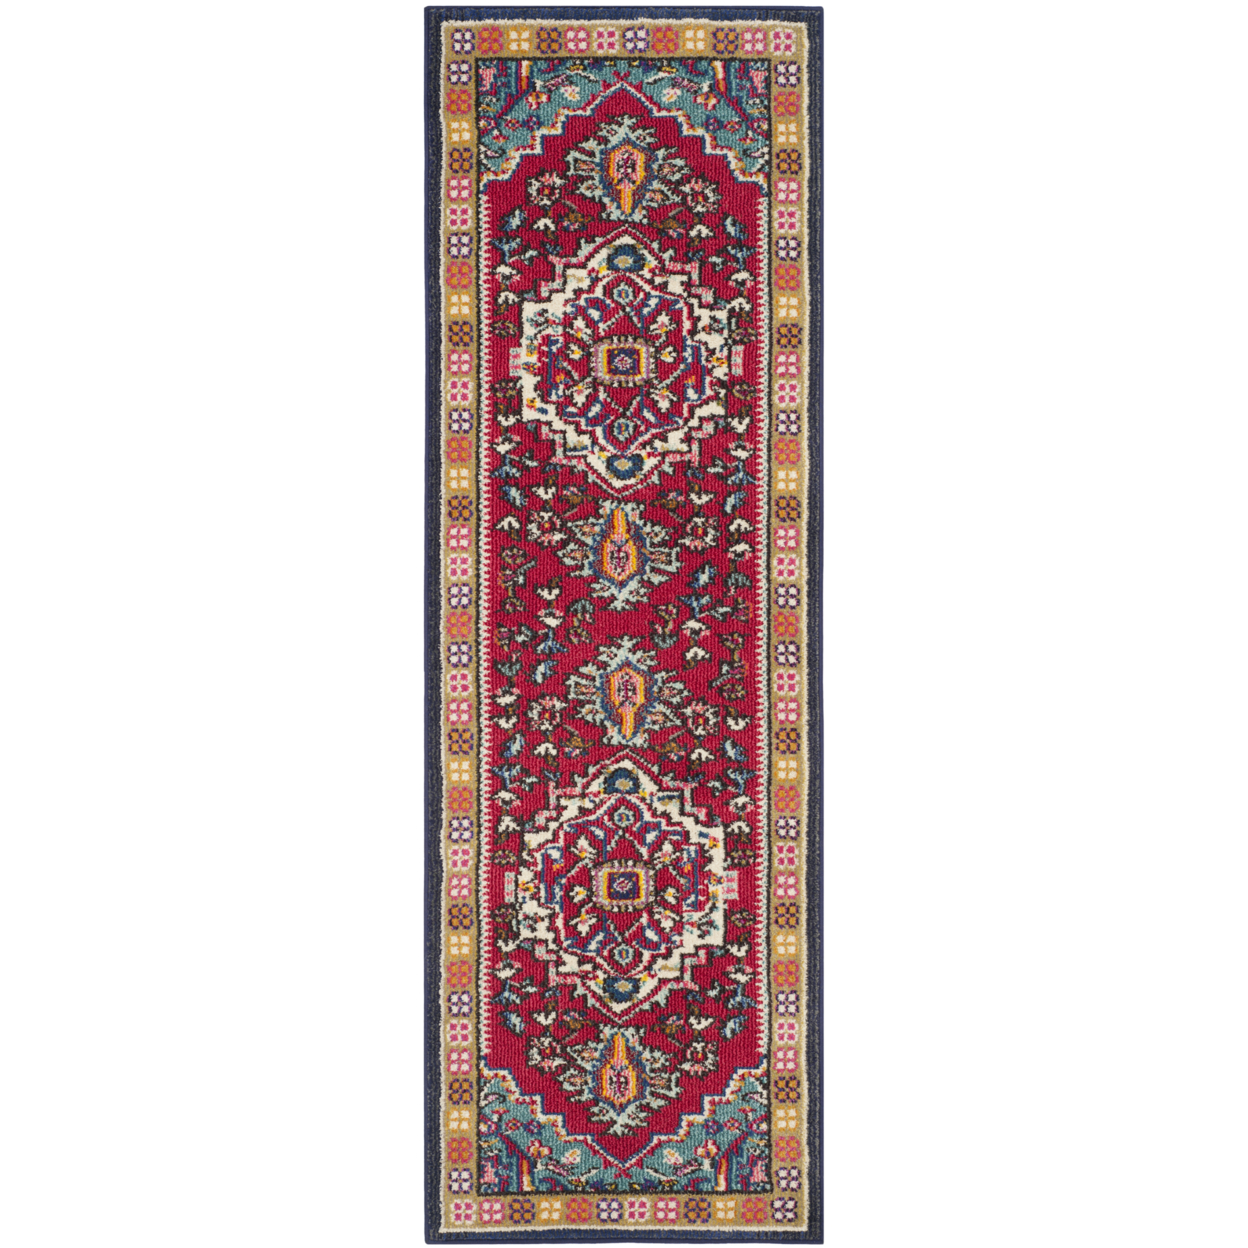 SAFAVIEH Monaco Collection MNCB207C Red / Turquoise Rug - 3' 4 X 4' 7 Rectangle